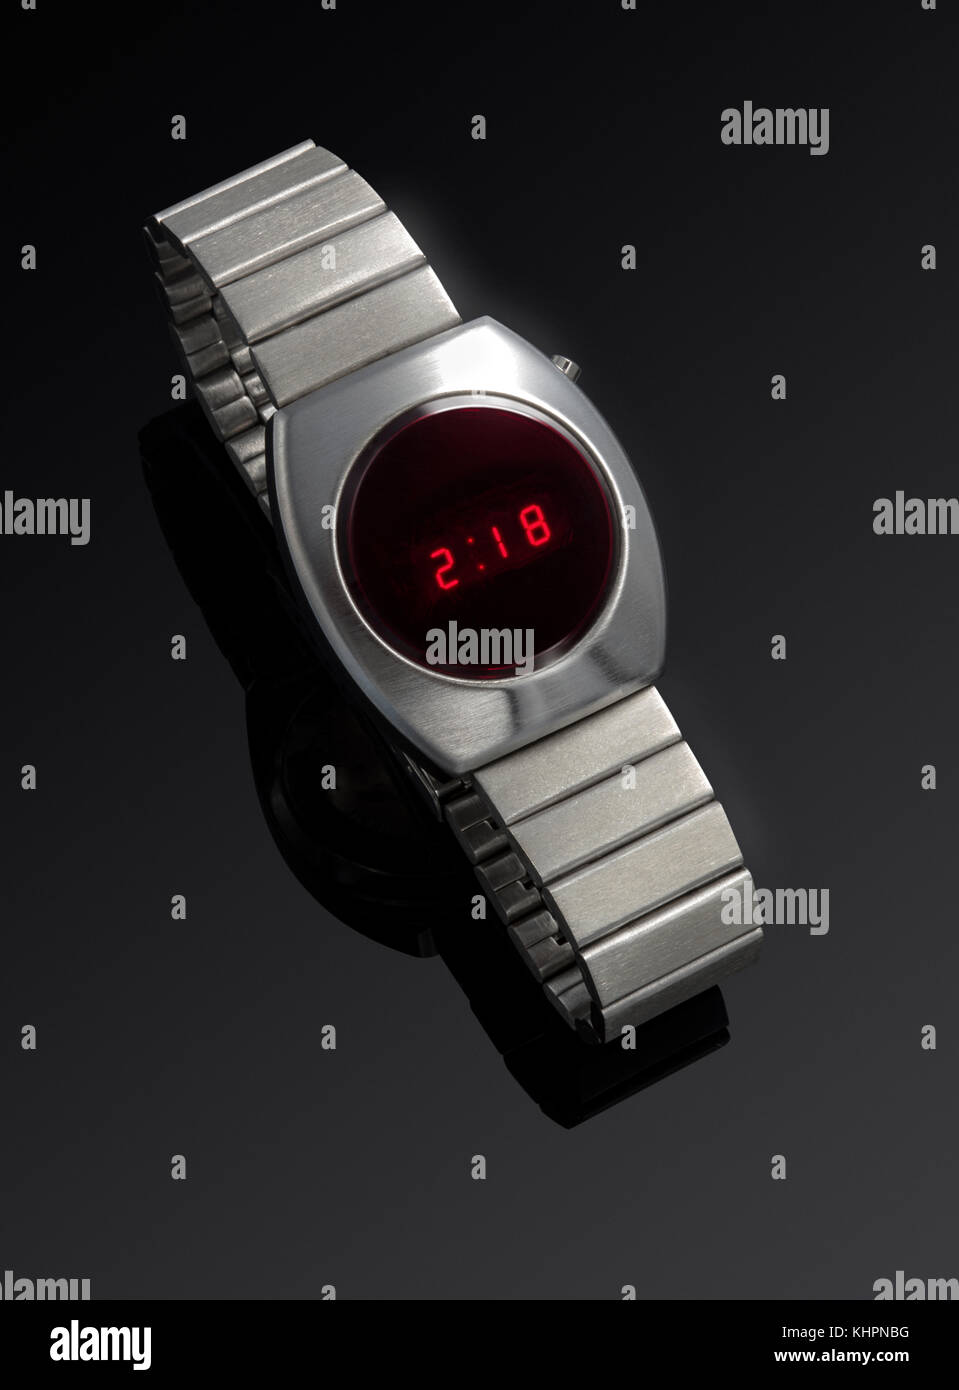 Commodore Digital wrist watch and stainless steel band against a black background Stock Photo